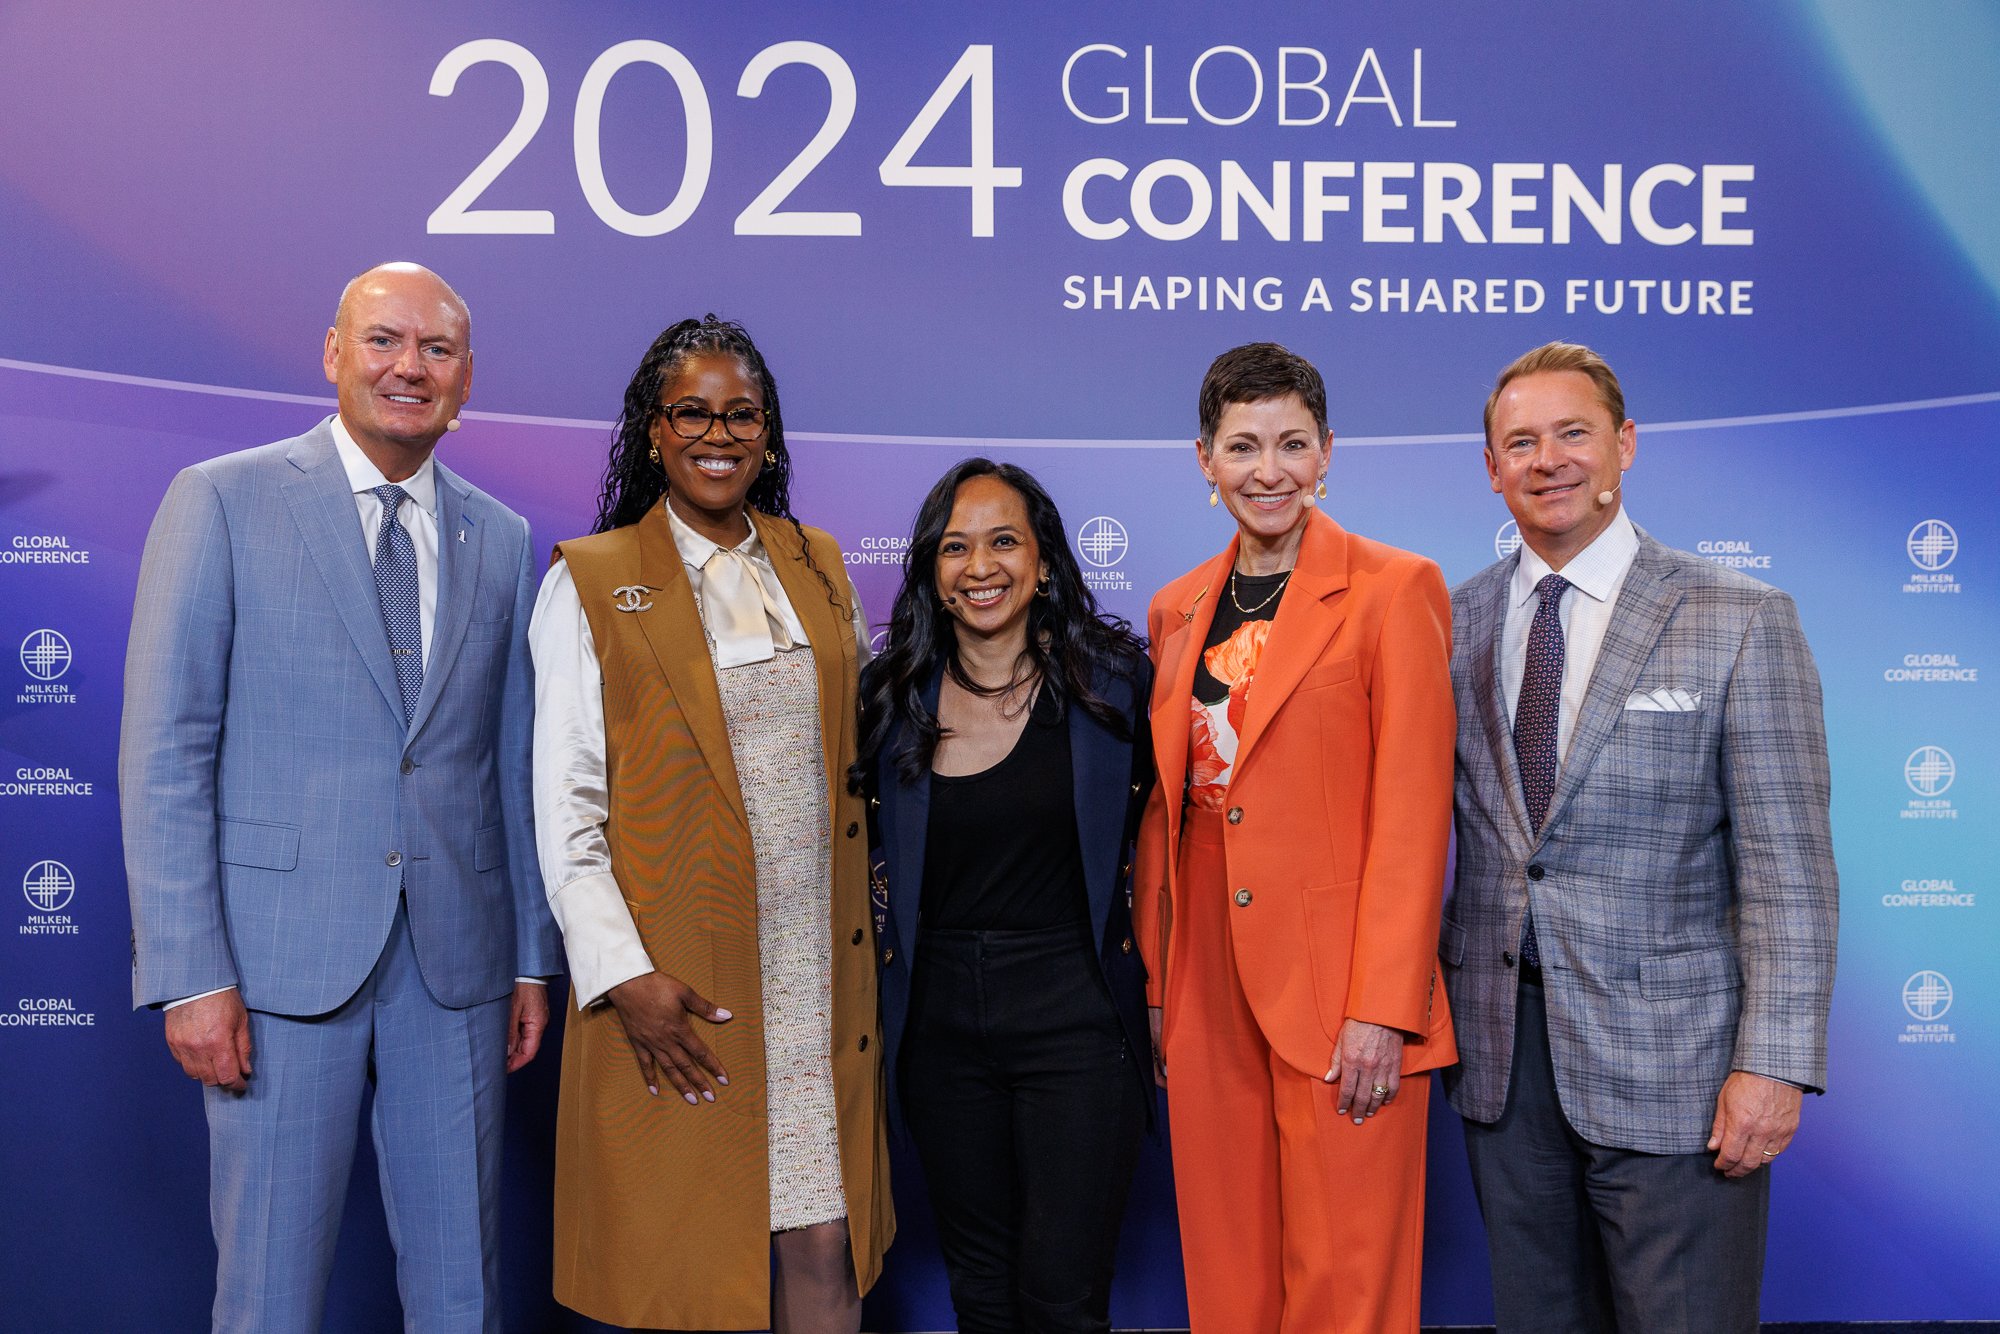 Left to right: John Carter, president and chief operating officer, Nationwide Financial; Thasunda Brown Duckett, president and CEO, TIAA; moderator Jennifer Ablan, editor-in-chief and chief content officer, Pensions and Investments; Penny Pennington, managing partner, Edward Jones; and Will Fuller, president and CEO, Transamerica 